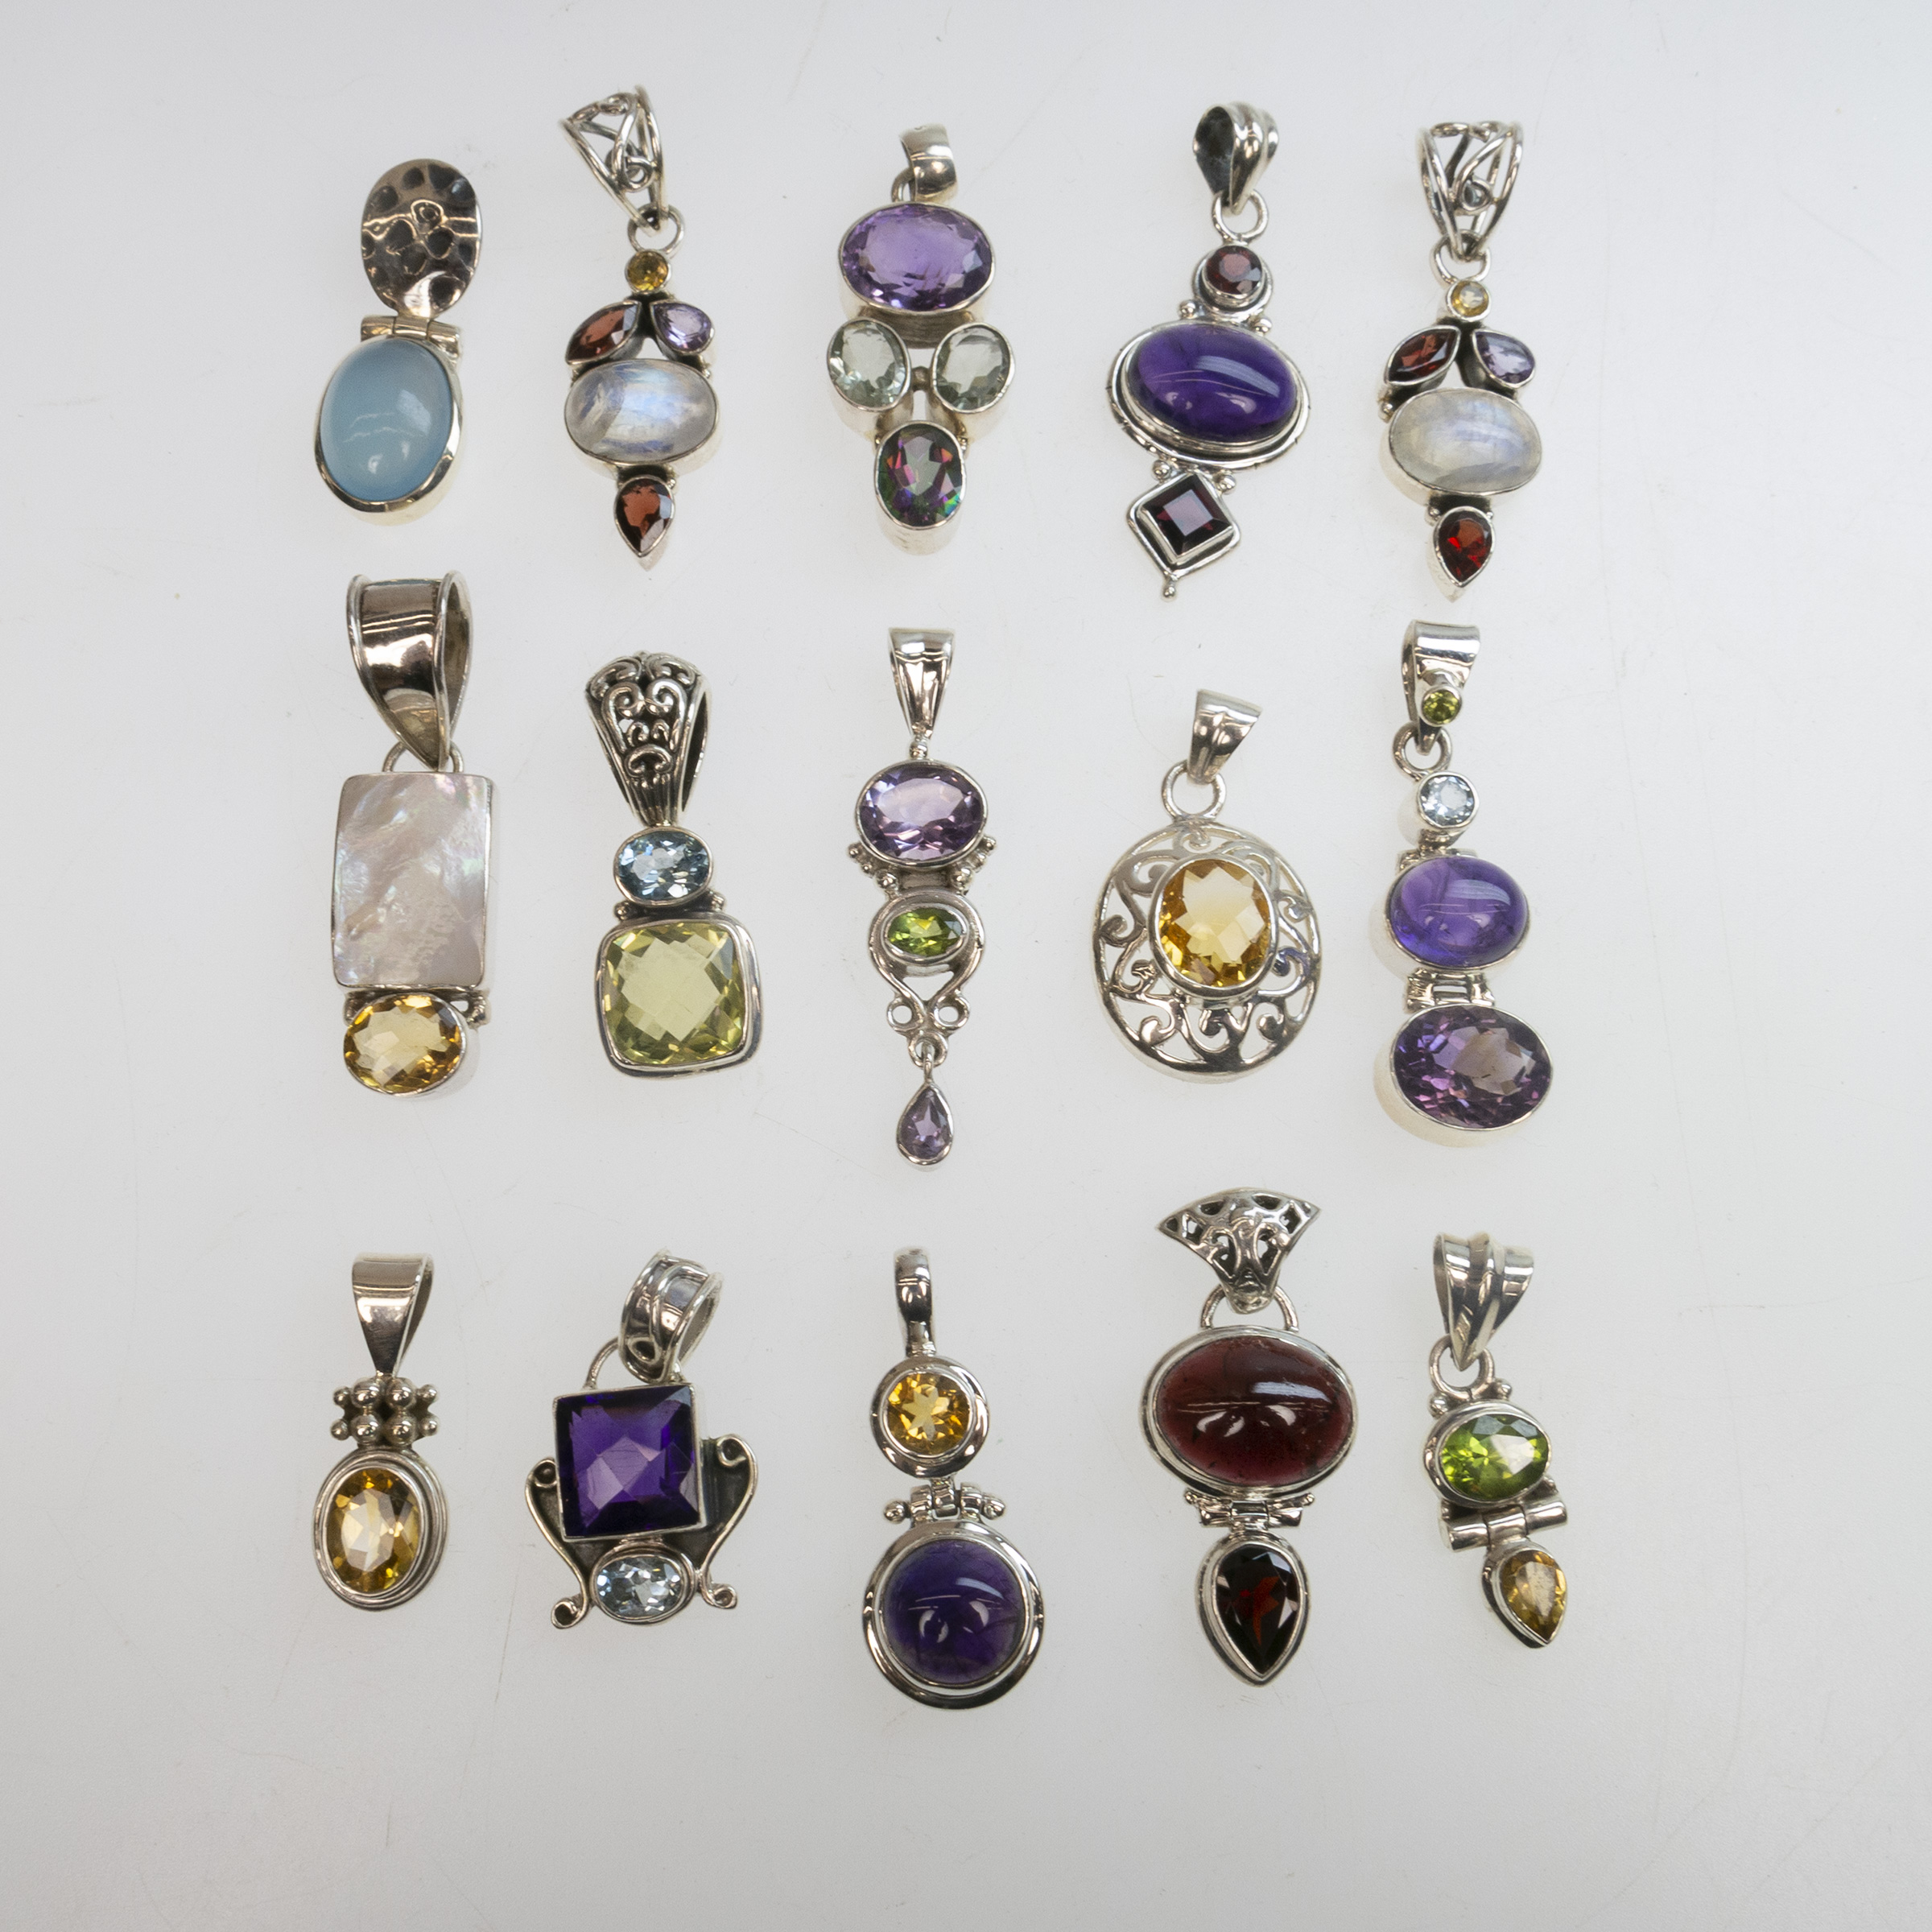 15 Various Small Sterling Silver Pendants